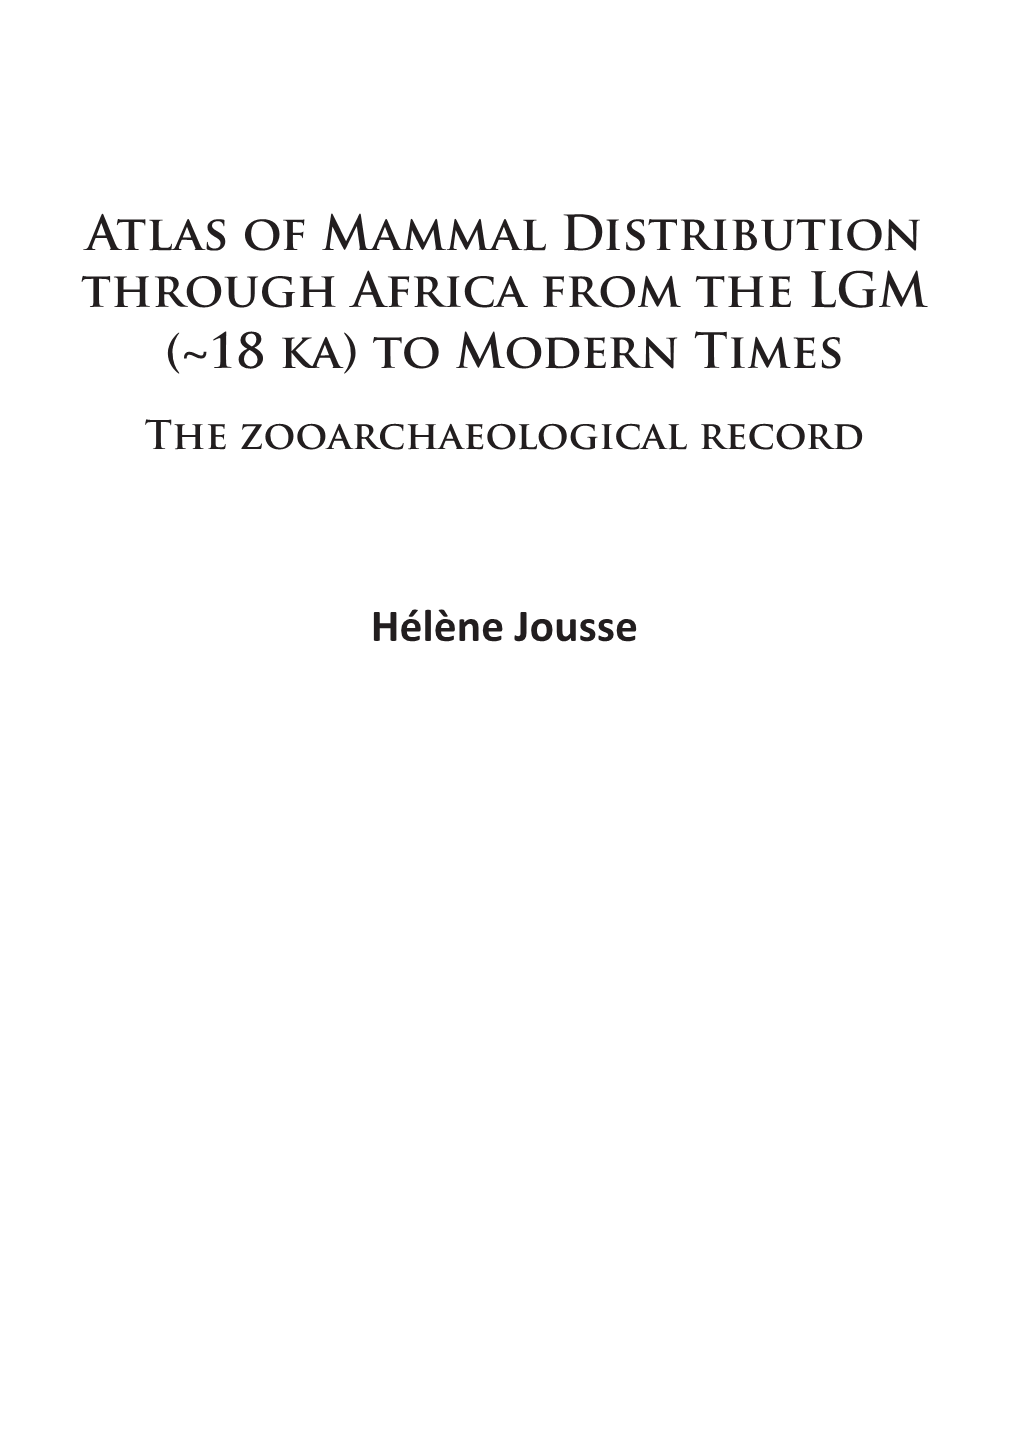 Atlas of Mammal Distribution Through Africa from the LGM (~18 Ka) to Modern Times